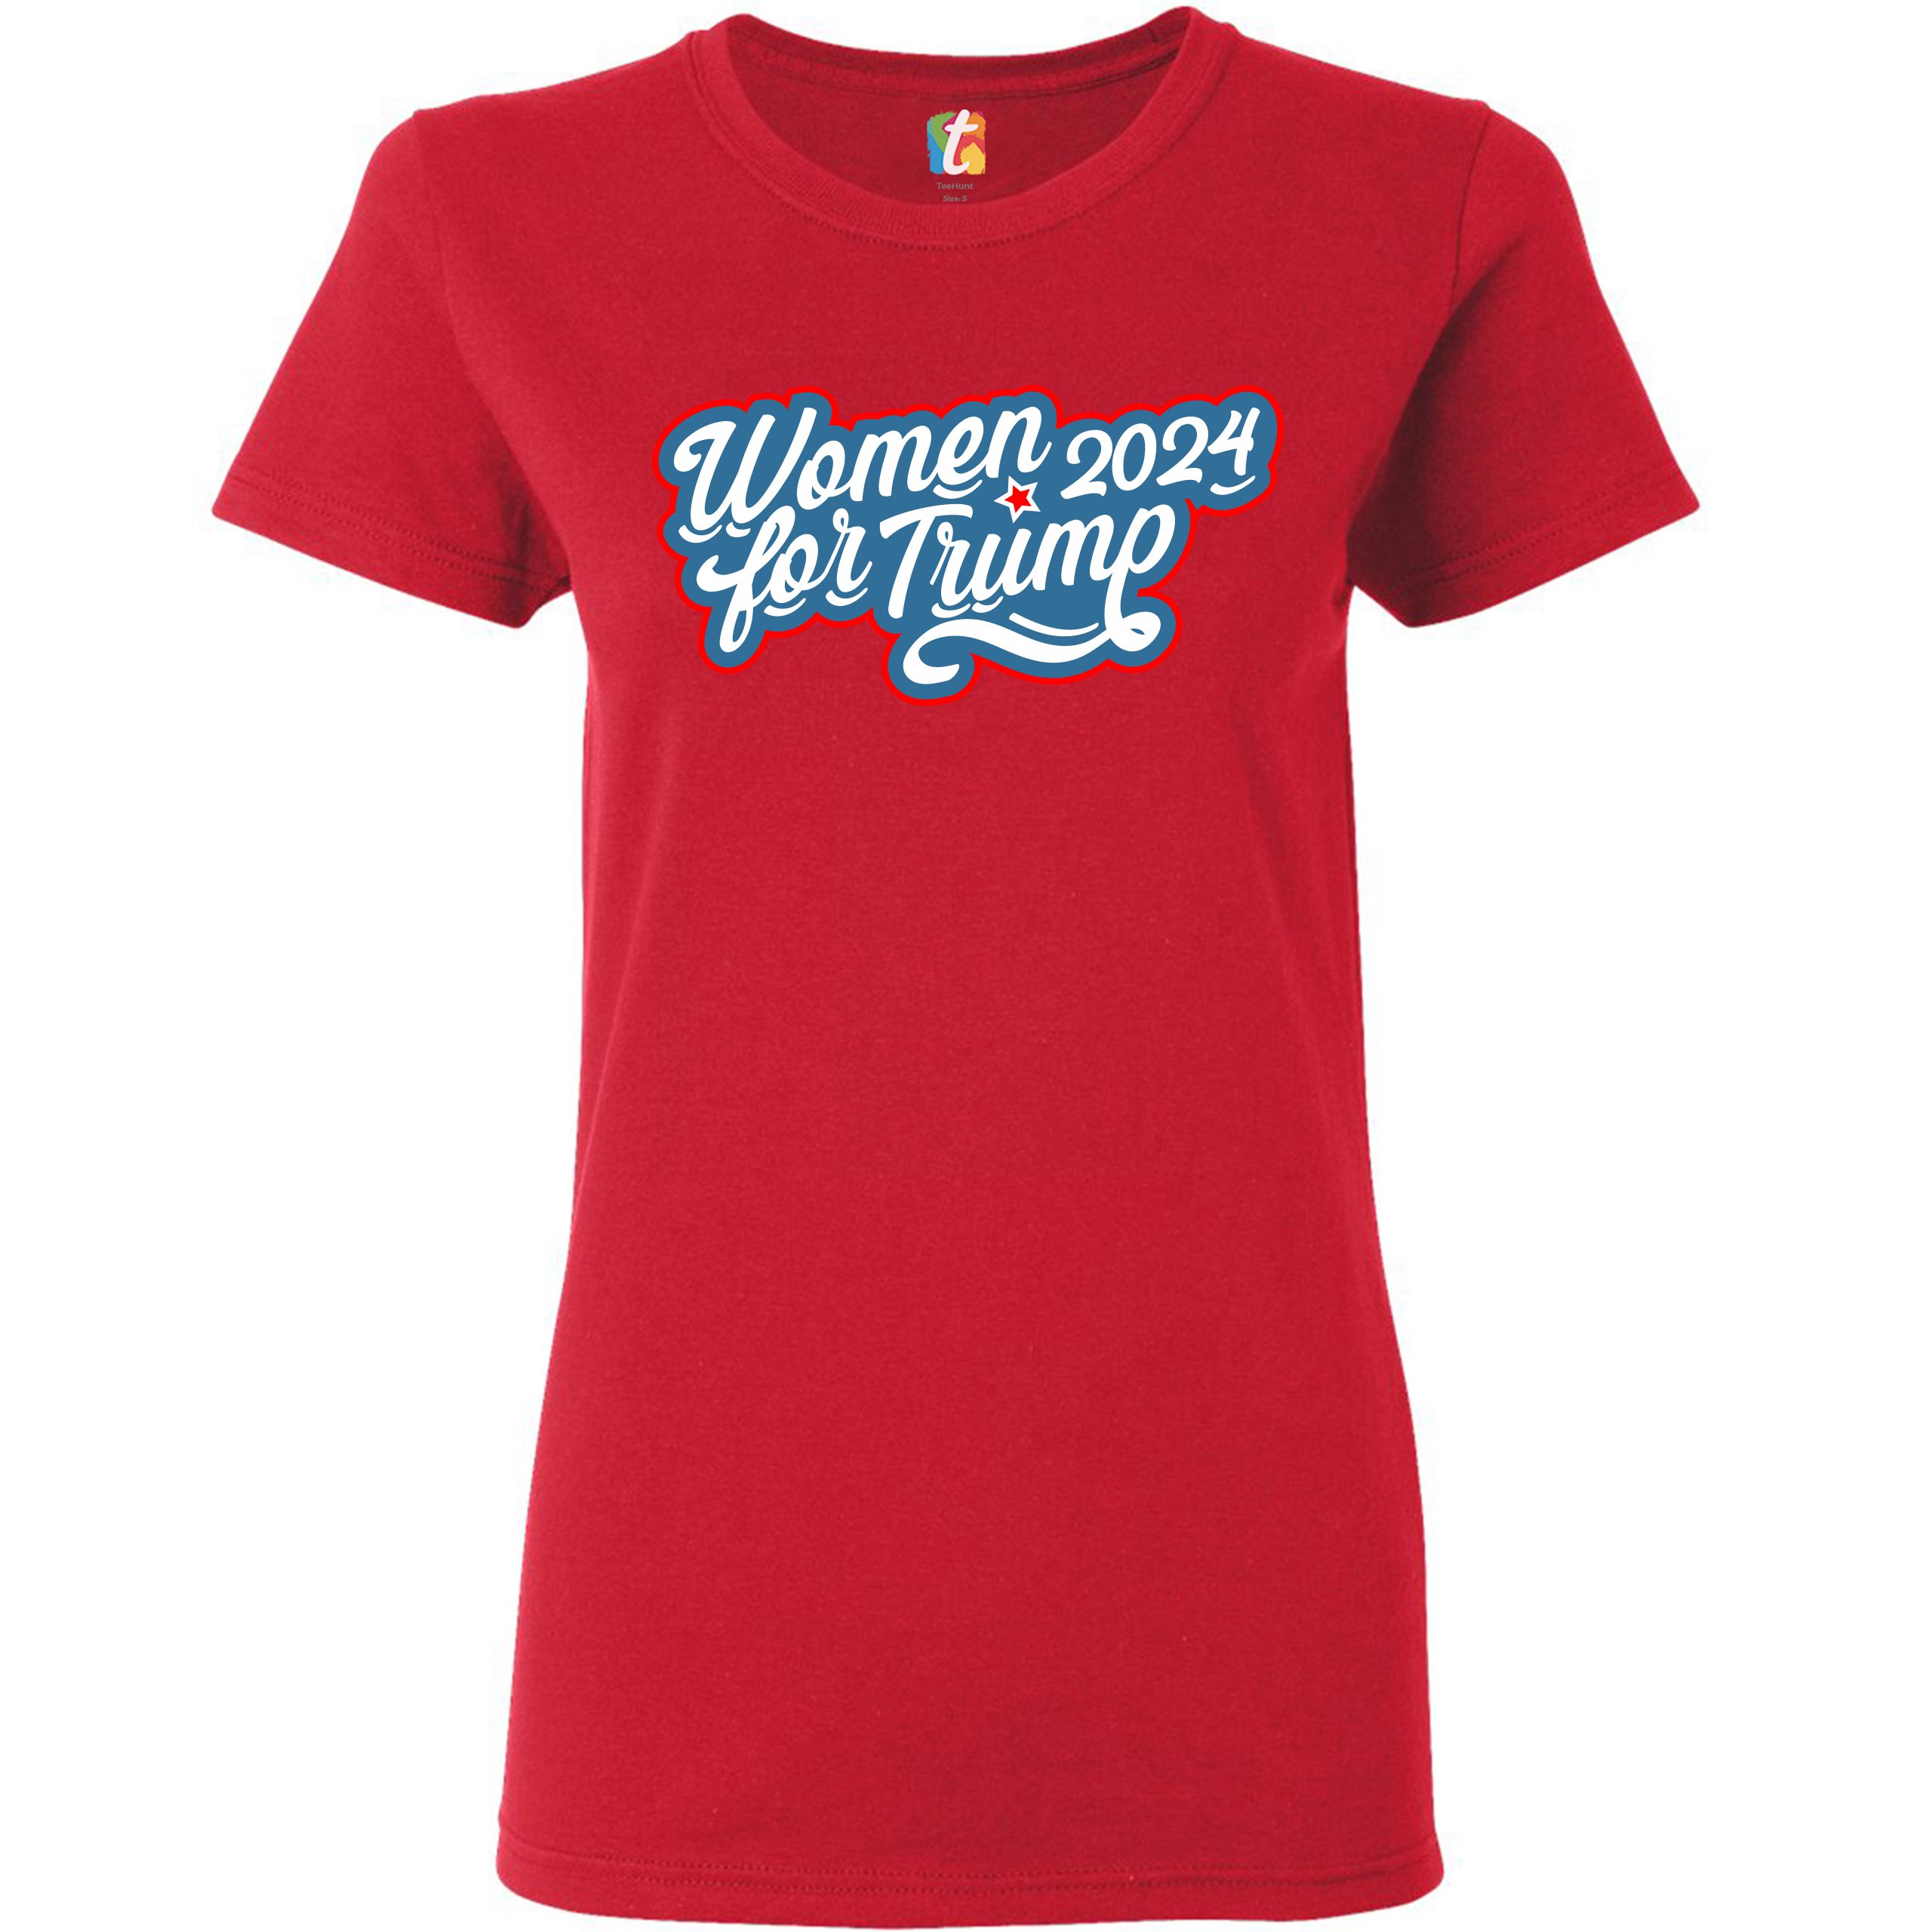 Women for Trump 2024 T-Shirt Conservative Trump Girl Vote Red Women's ...